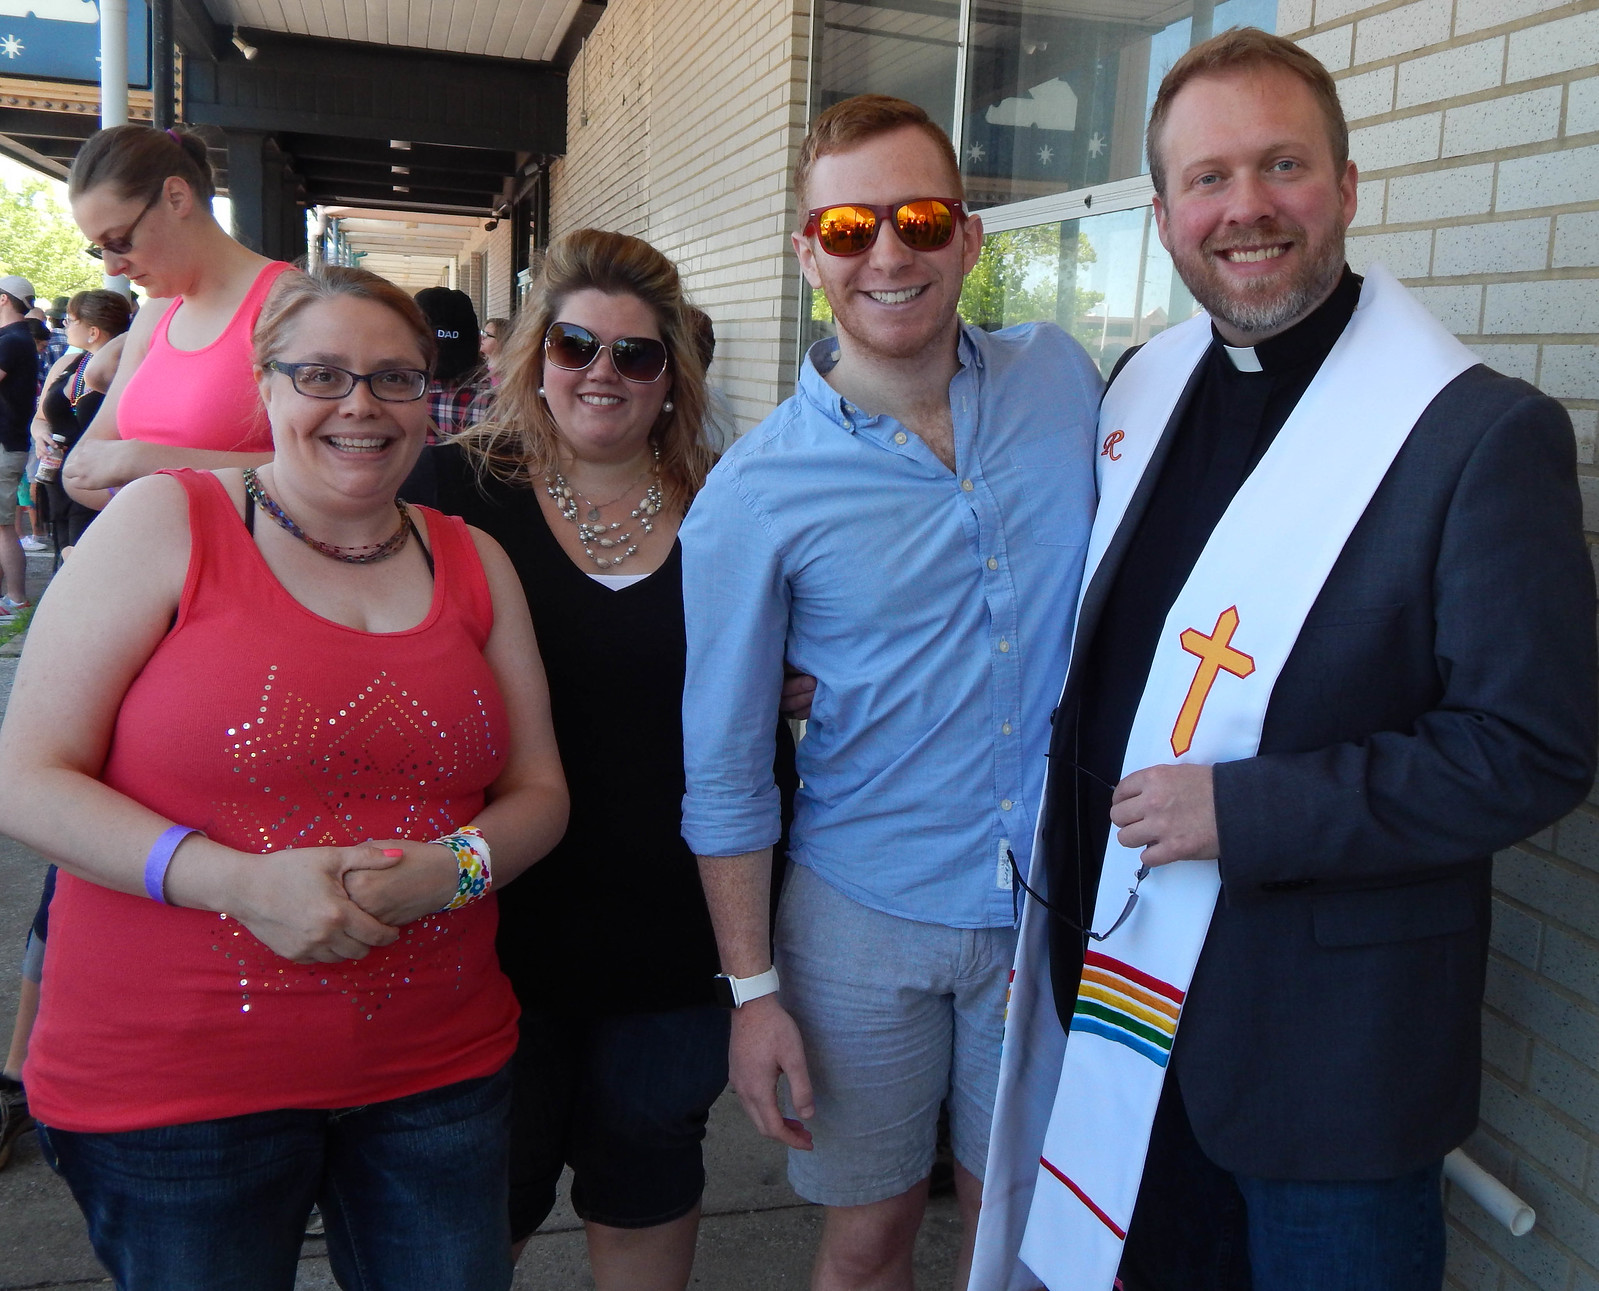 Members of Community United Church with Matthew and Rev. Dr. RIch McCarty